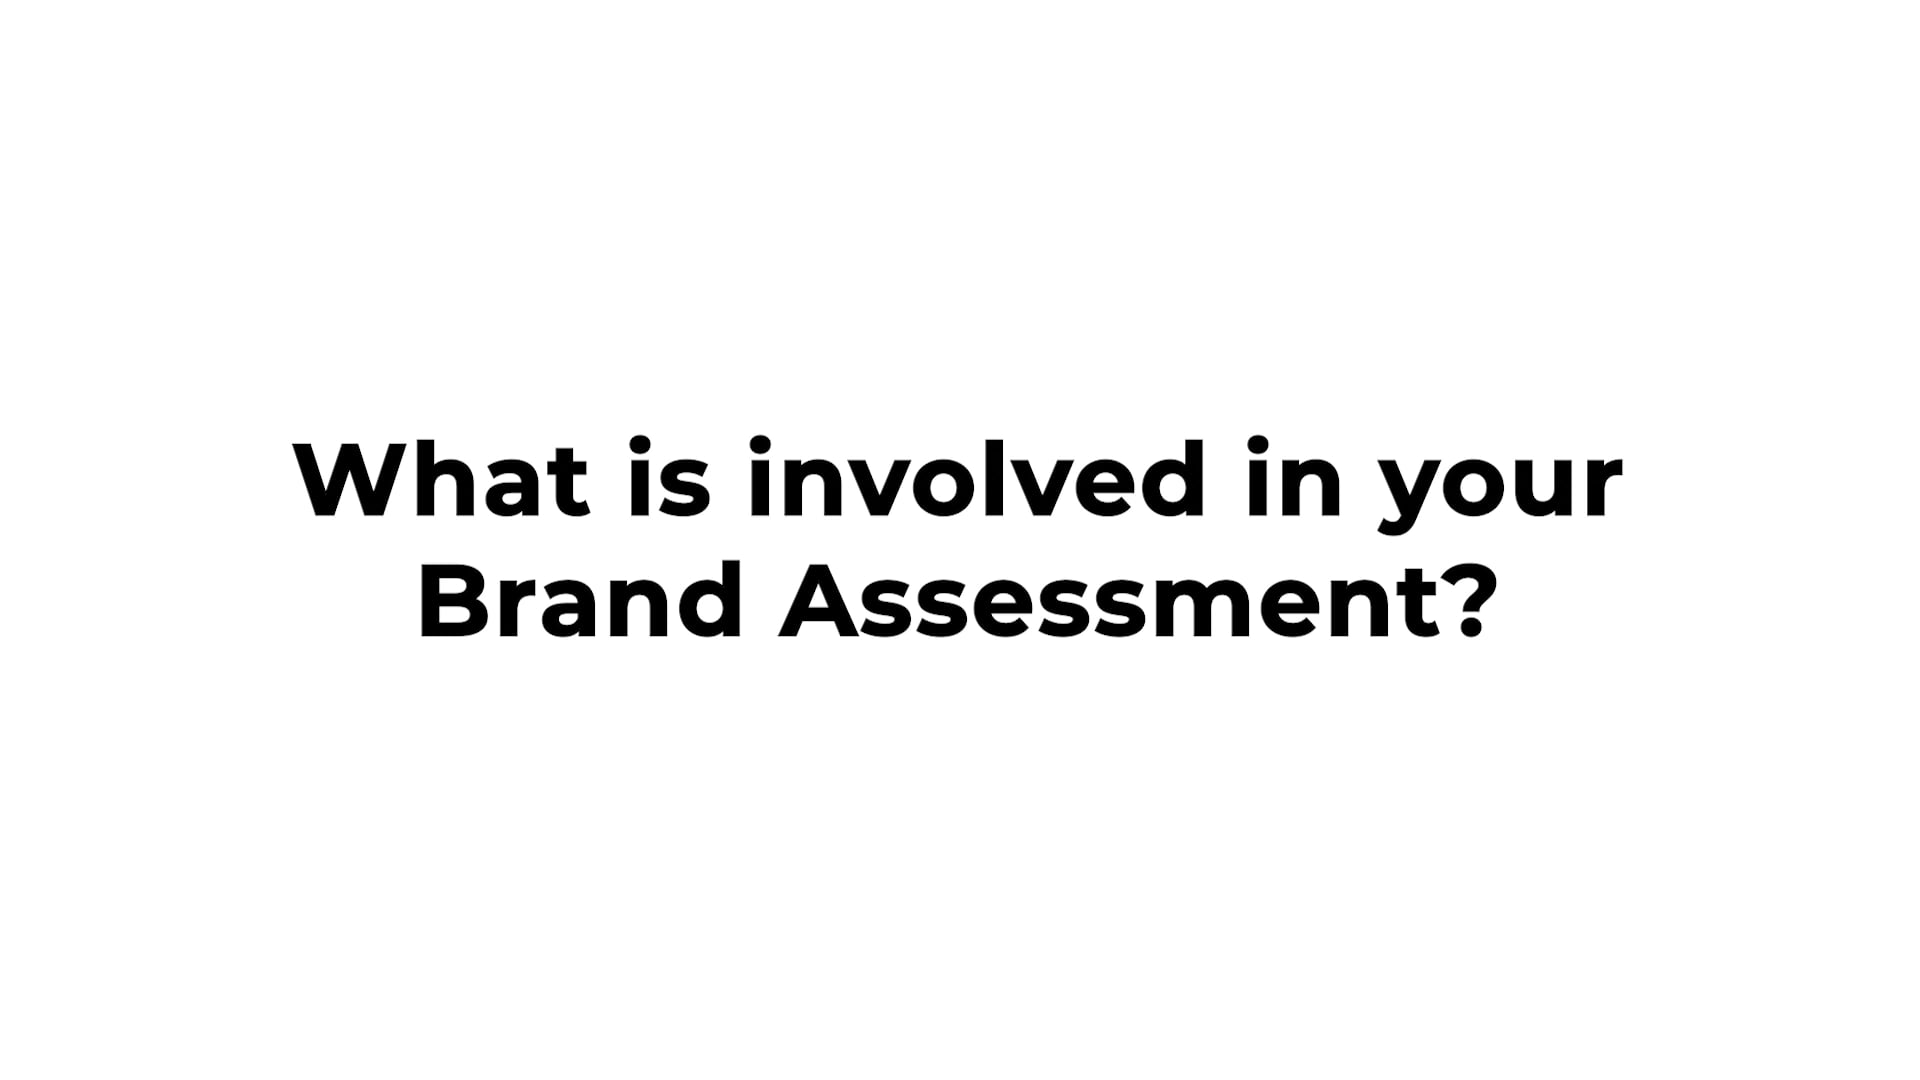 What's involved with our Brand assessment?